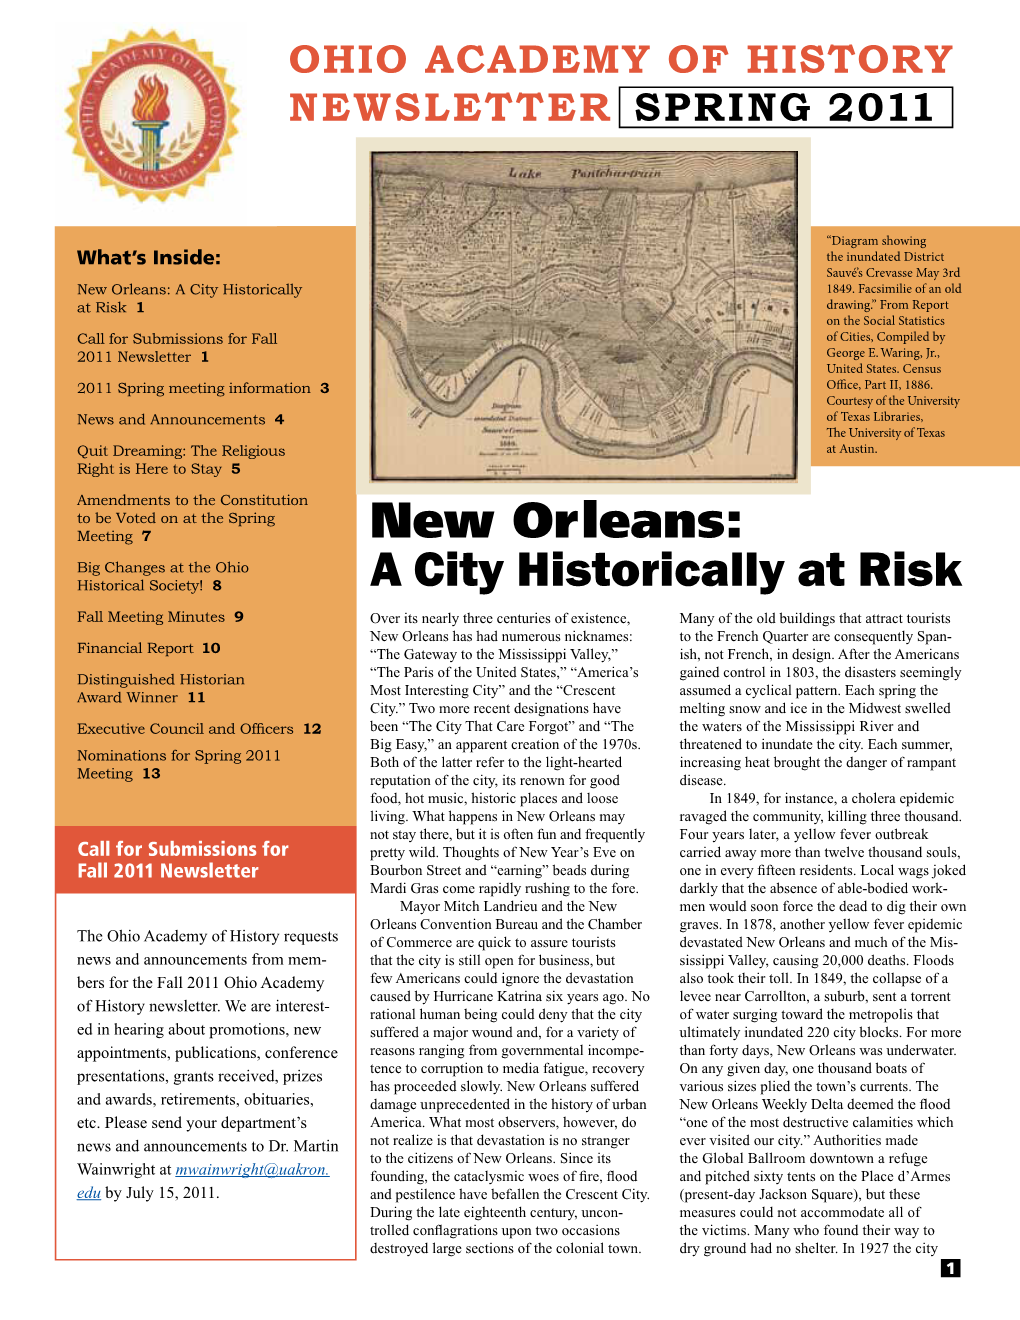 New Orleans: a City Historically at Risk